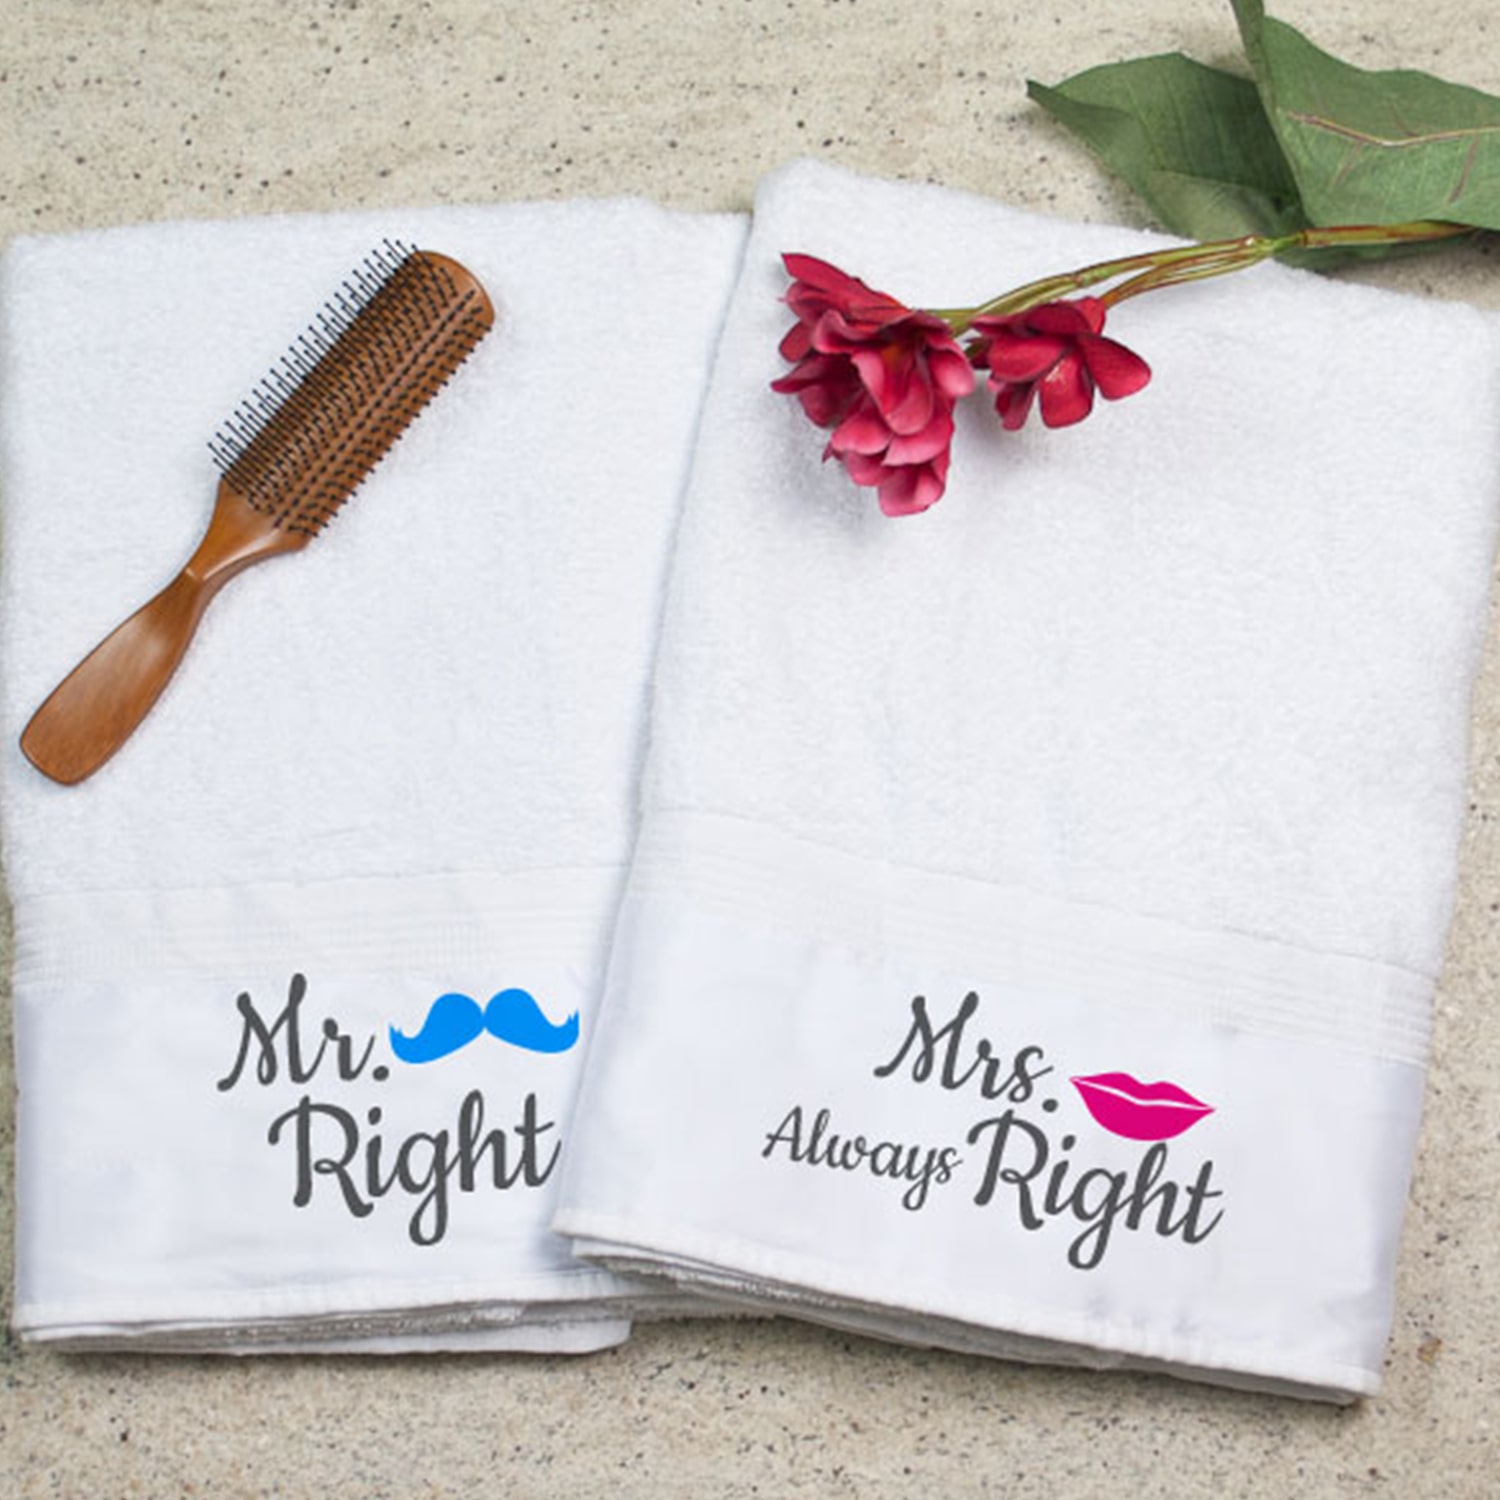 Mr and Mrs Right Personalized Bath Towel